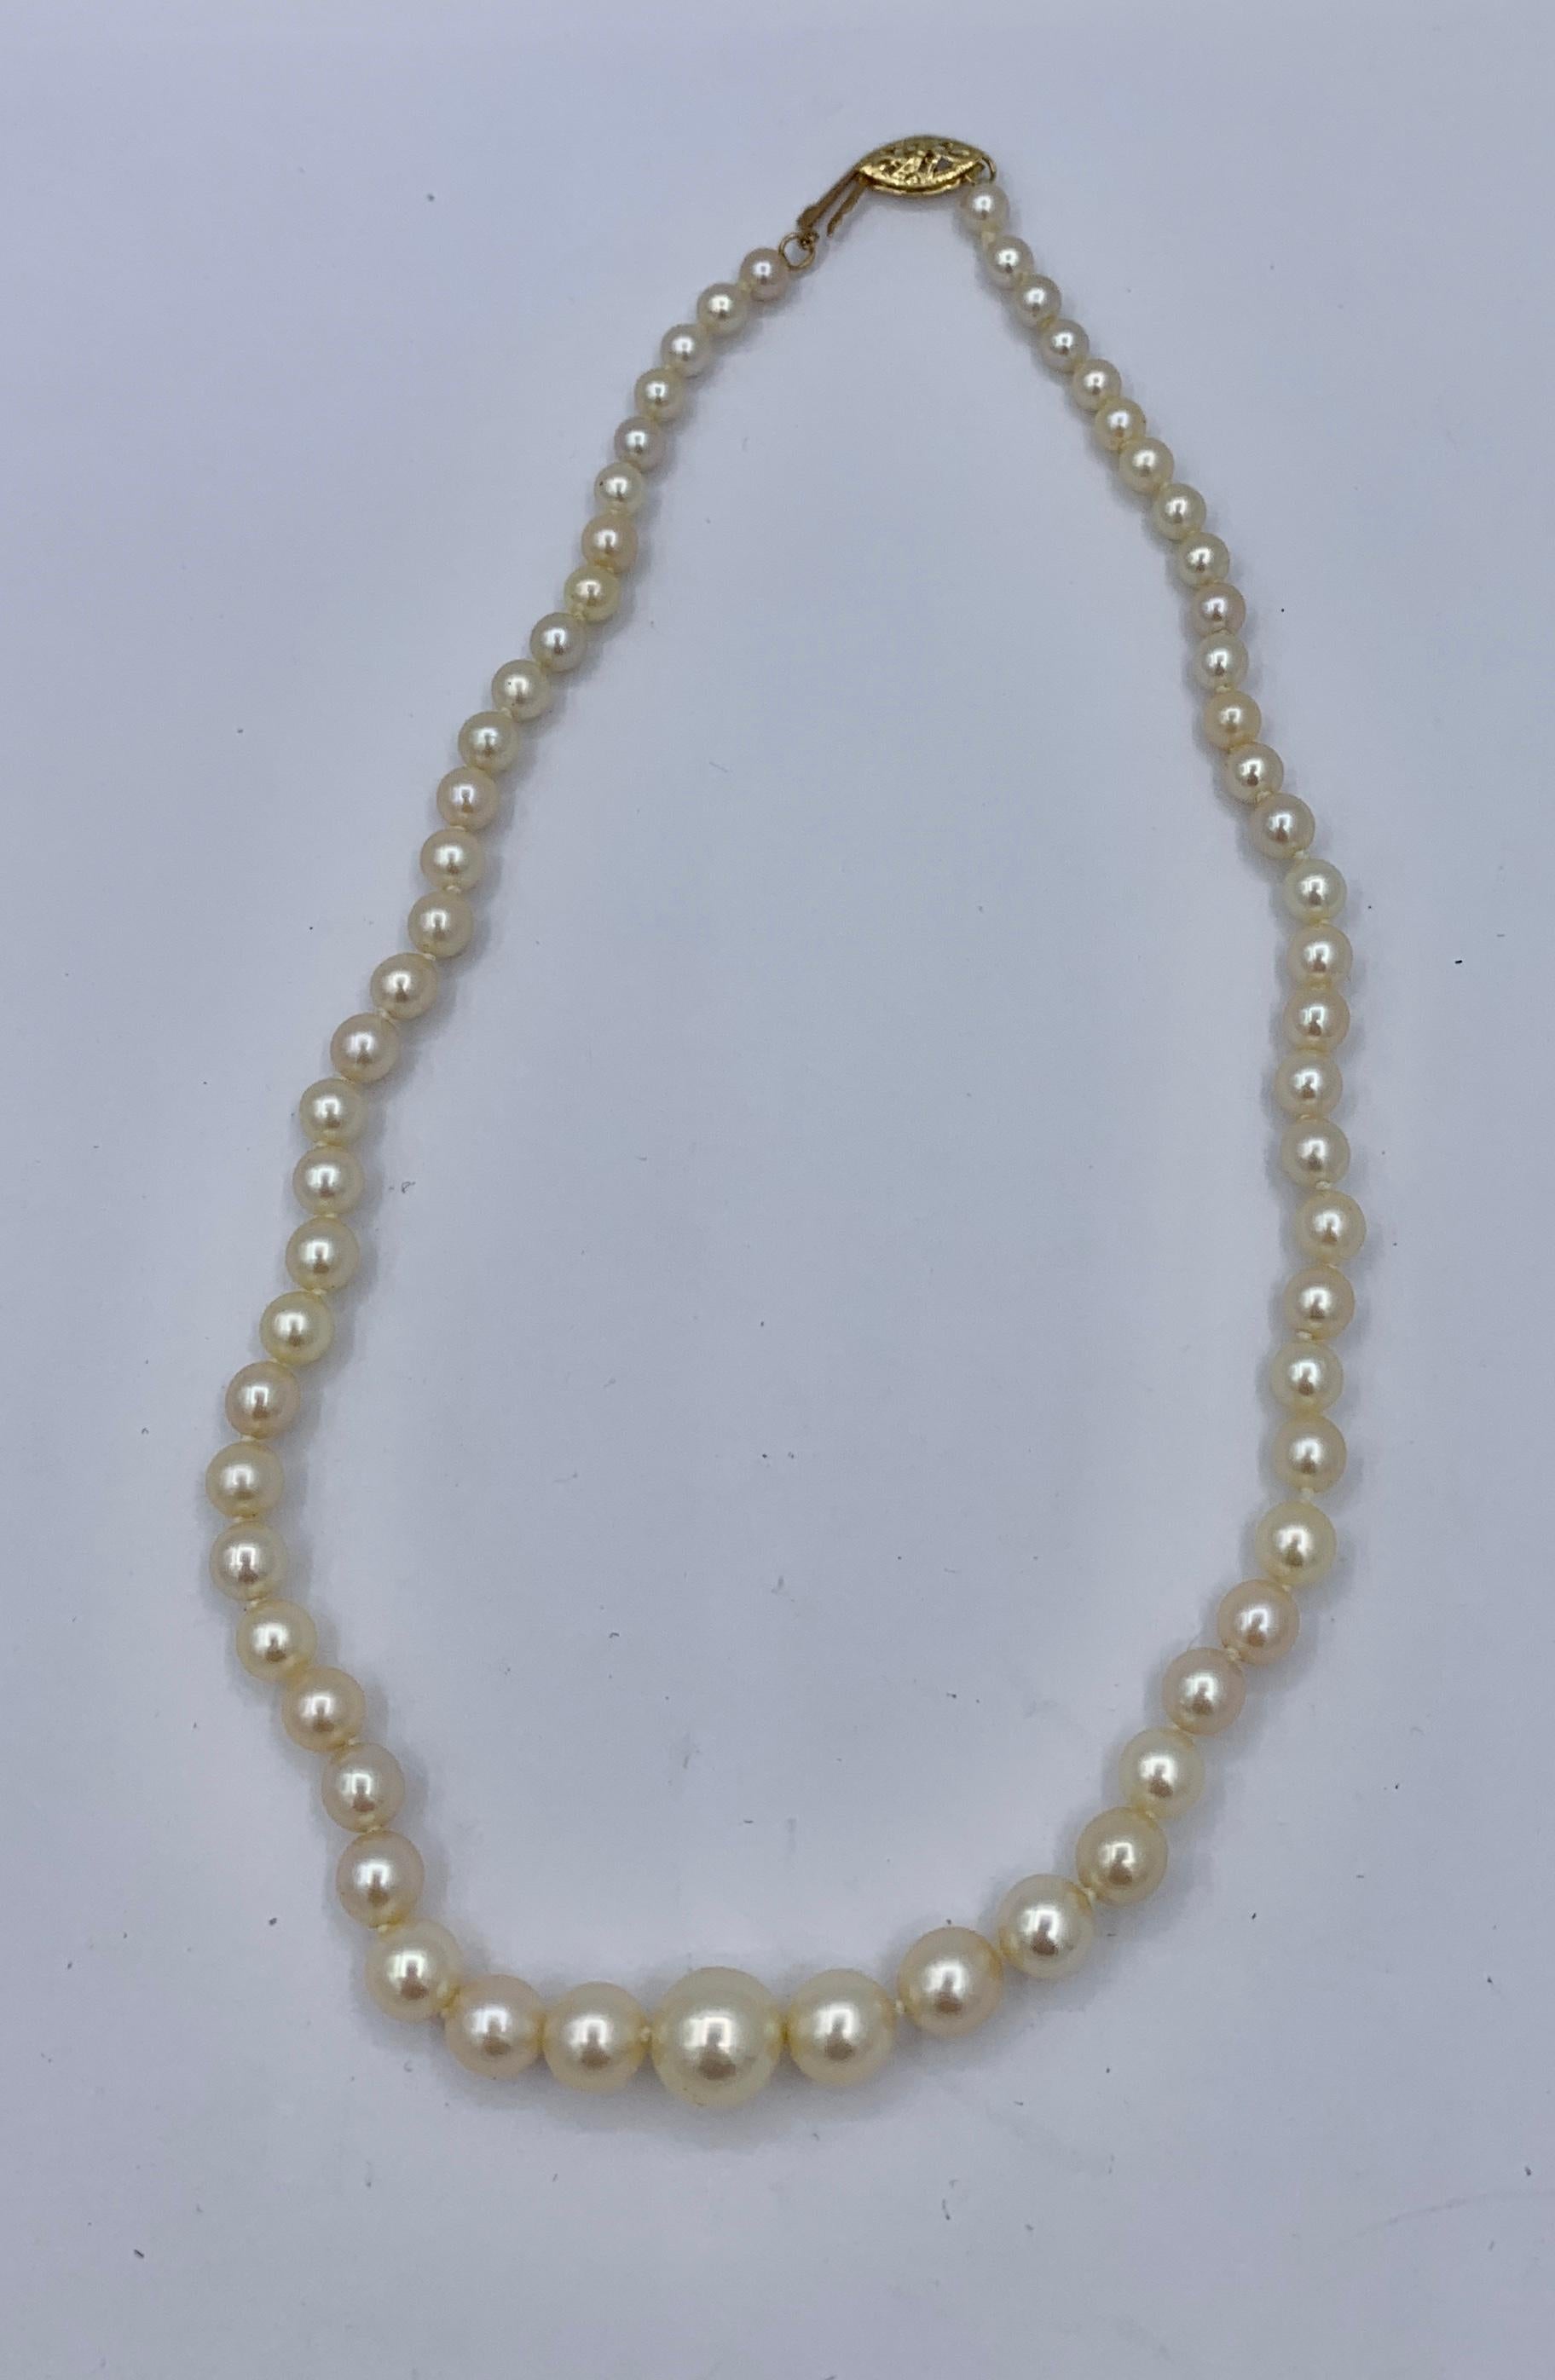 This is a beautiful 15 inch long Graduated Cultured Pearl Necklace with pearls graduated from 5mm to 10mm with a 14 Karat Yellow Gold clasp.   The pearls are beautiful silvery white pearls which are each individually knotted.  The stunning pearl